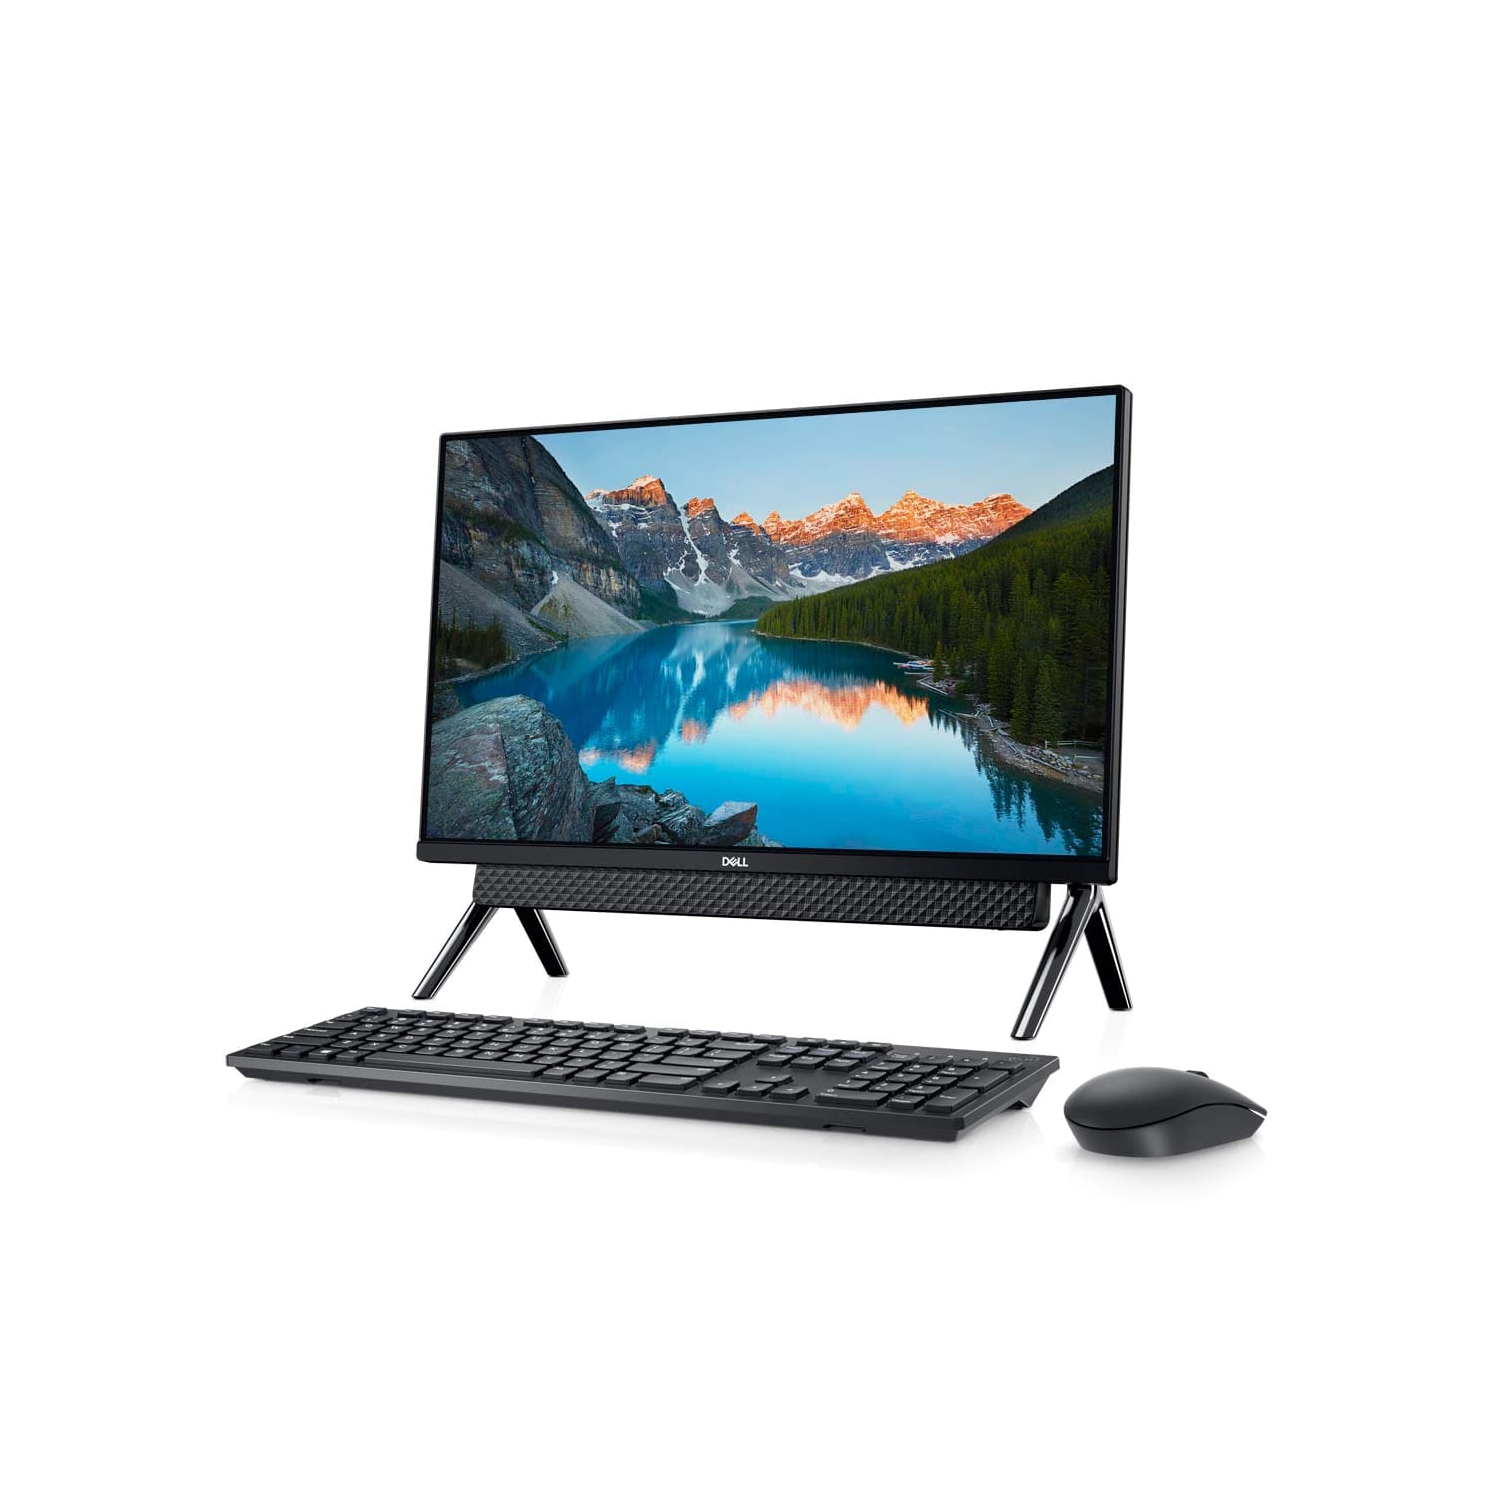 Refurbished (Excellent) - Dell Inspiron 24 5490 AIO (2019) | 24" FHD Touch | Core i3 - 1TB HDD - 8GB RAM | 2 Cores @ 4.1 GHz - 10th Gen CPU Certified Refurbished